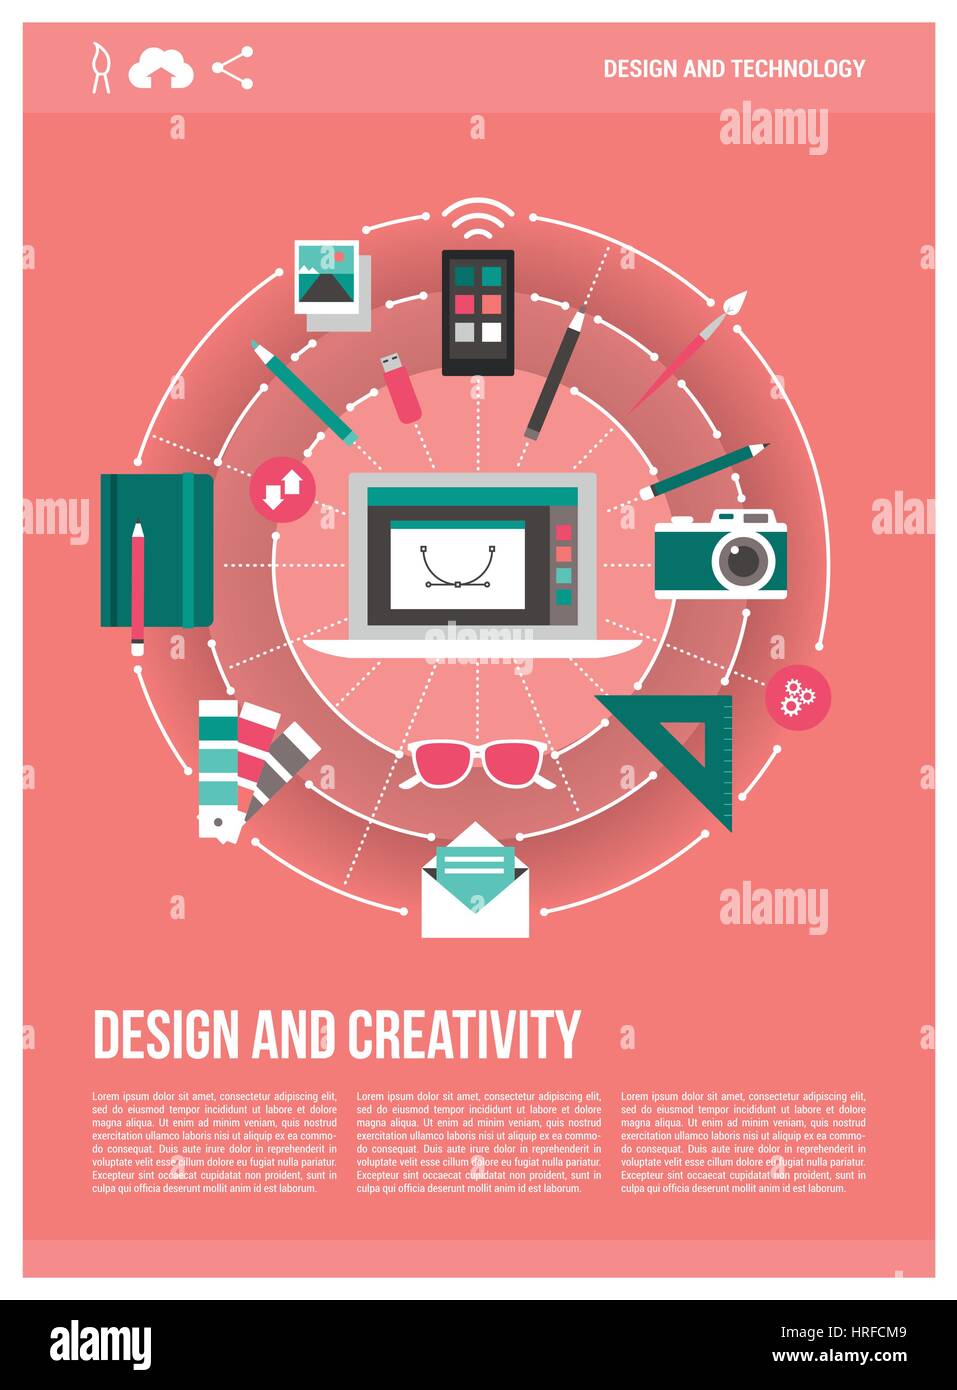 Design, creativity and technology poster: laptop, graphic designer work tools and icons connecting together Stock Vector